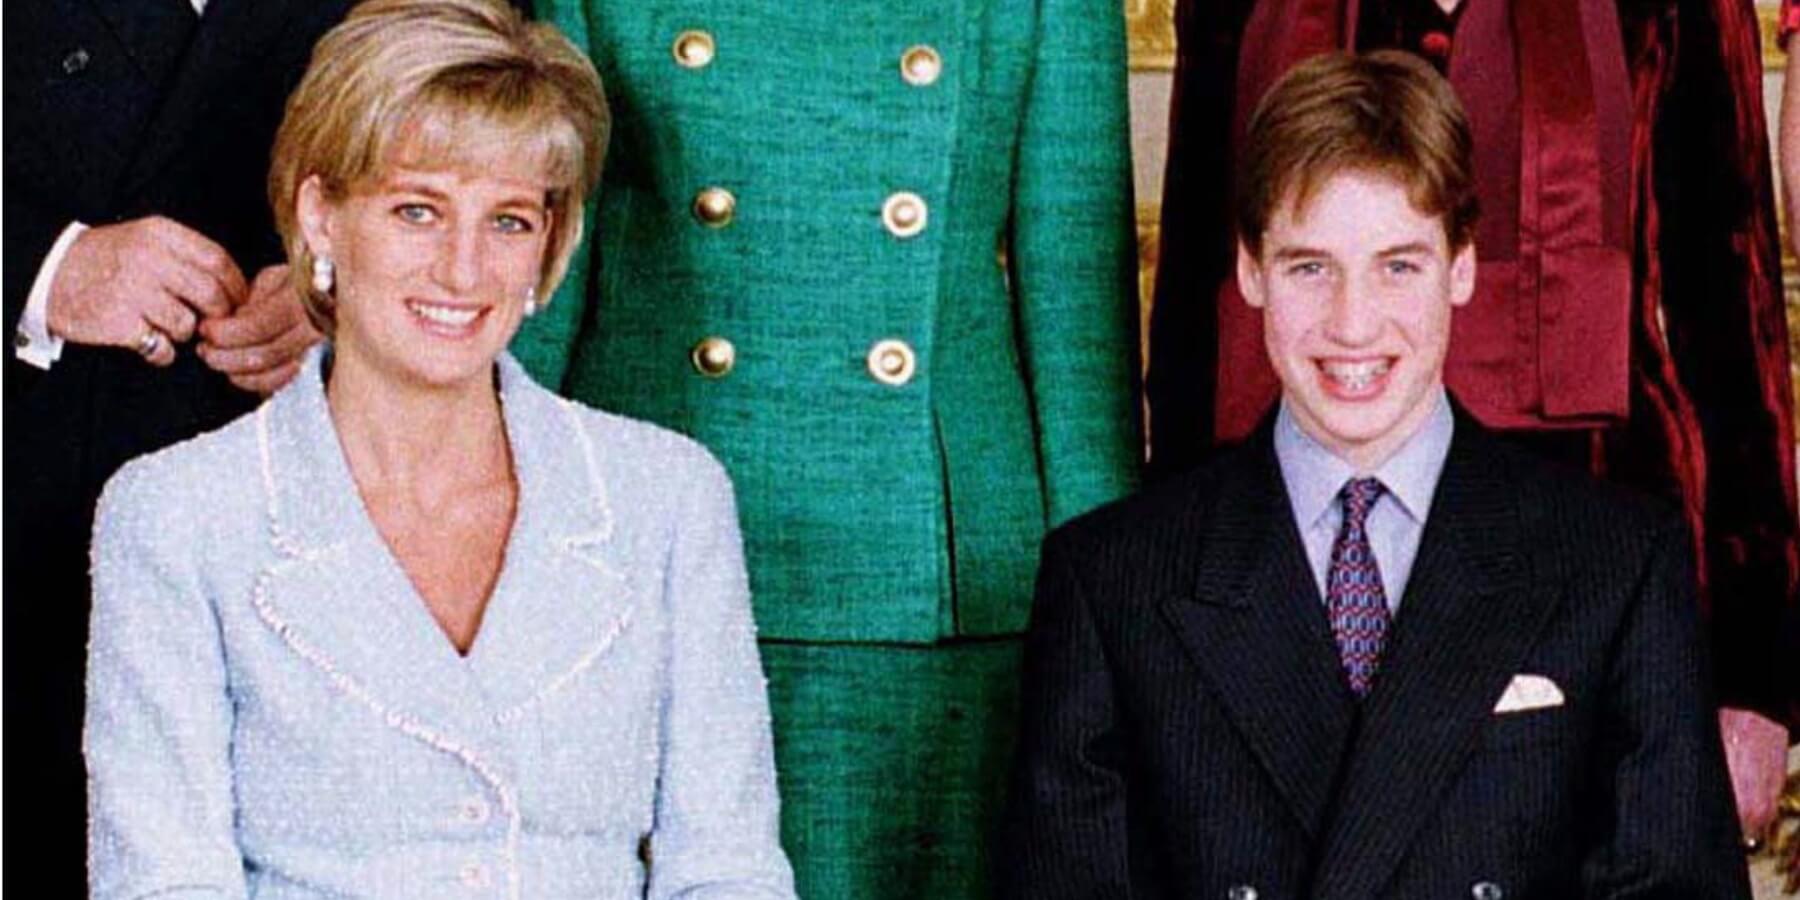 Princess Diana and Prince William at his confirmation